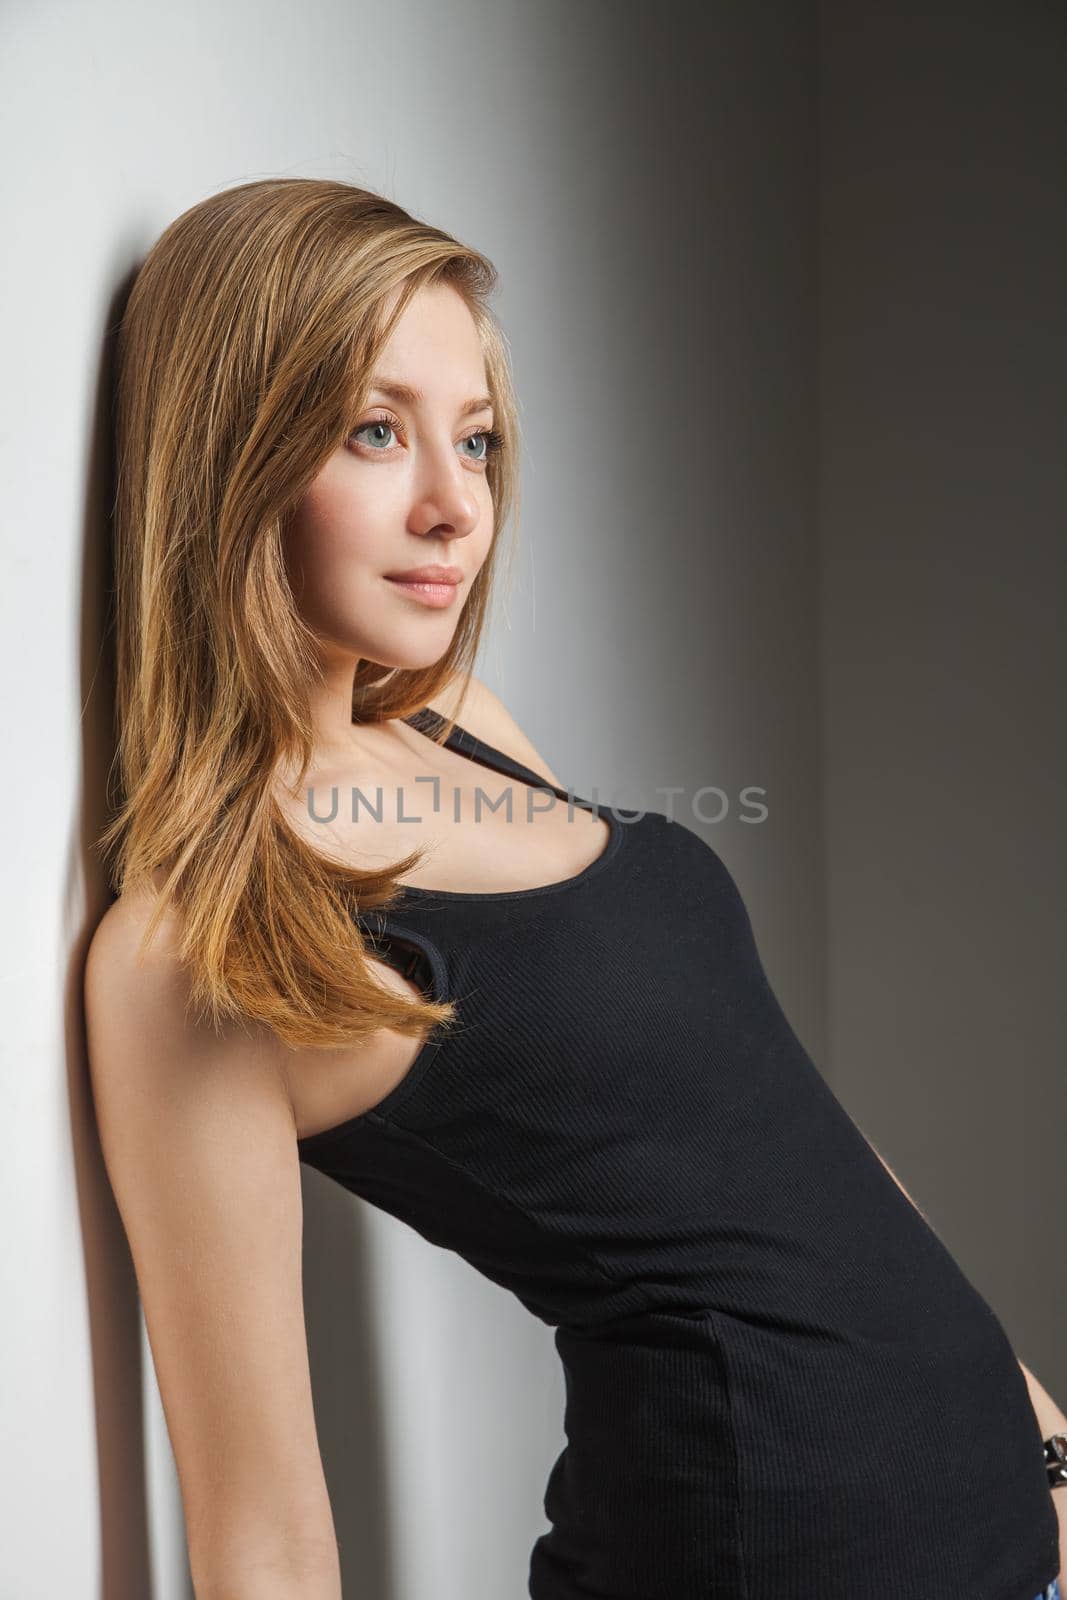 Beautiful young woman wearing jeans and black t-shirt over gray background